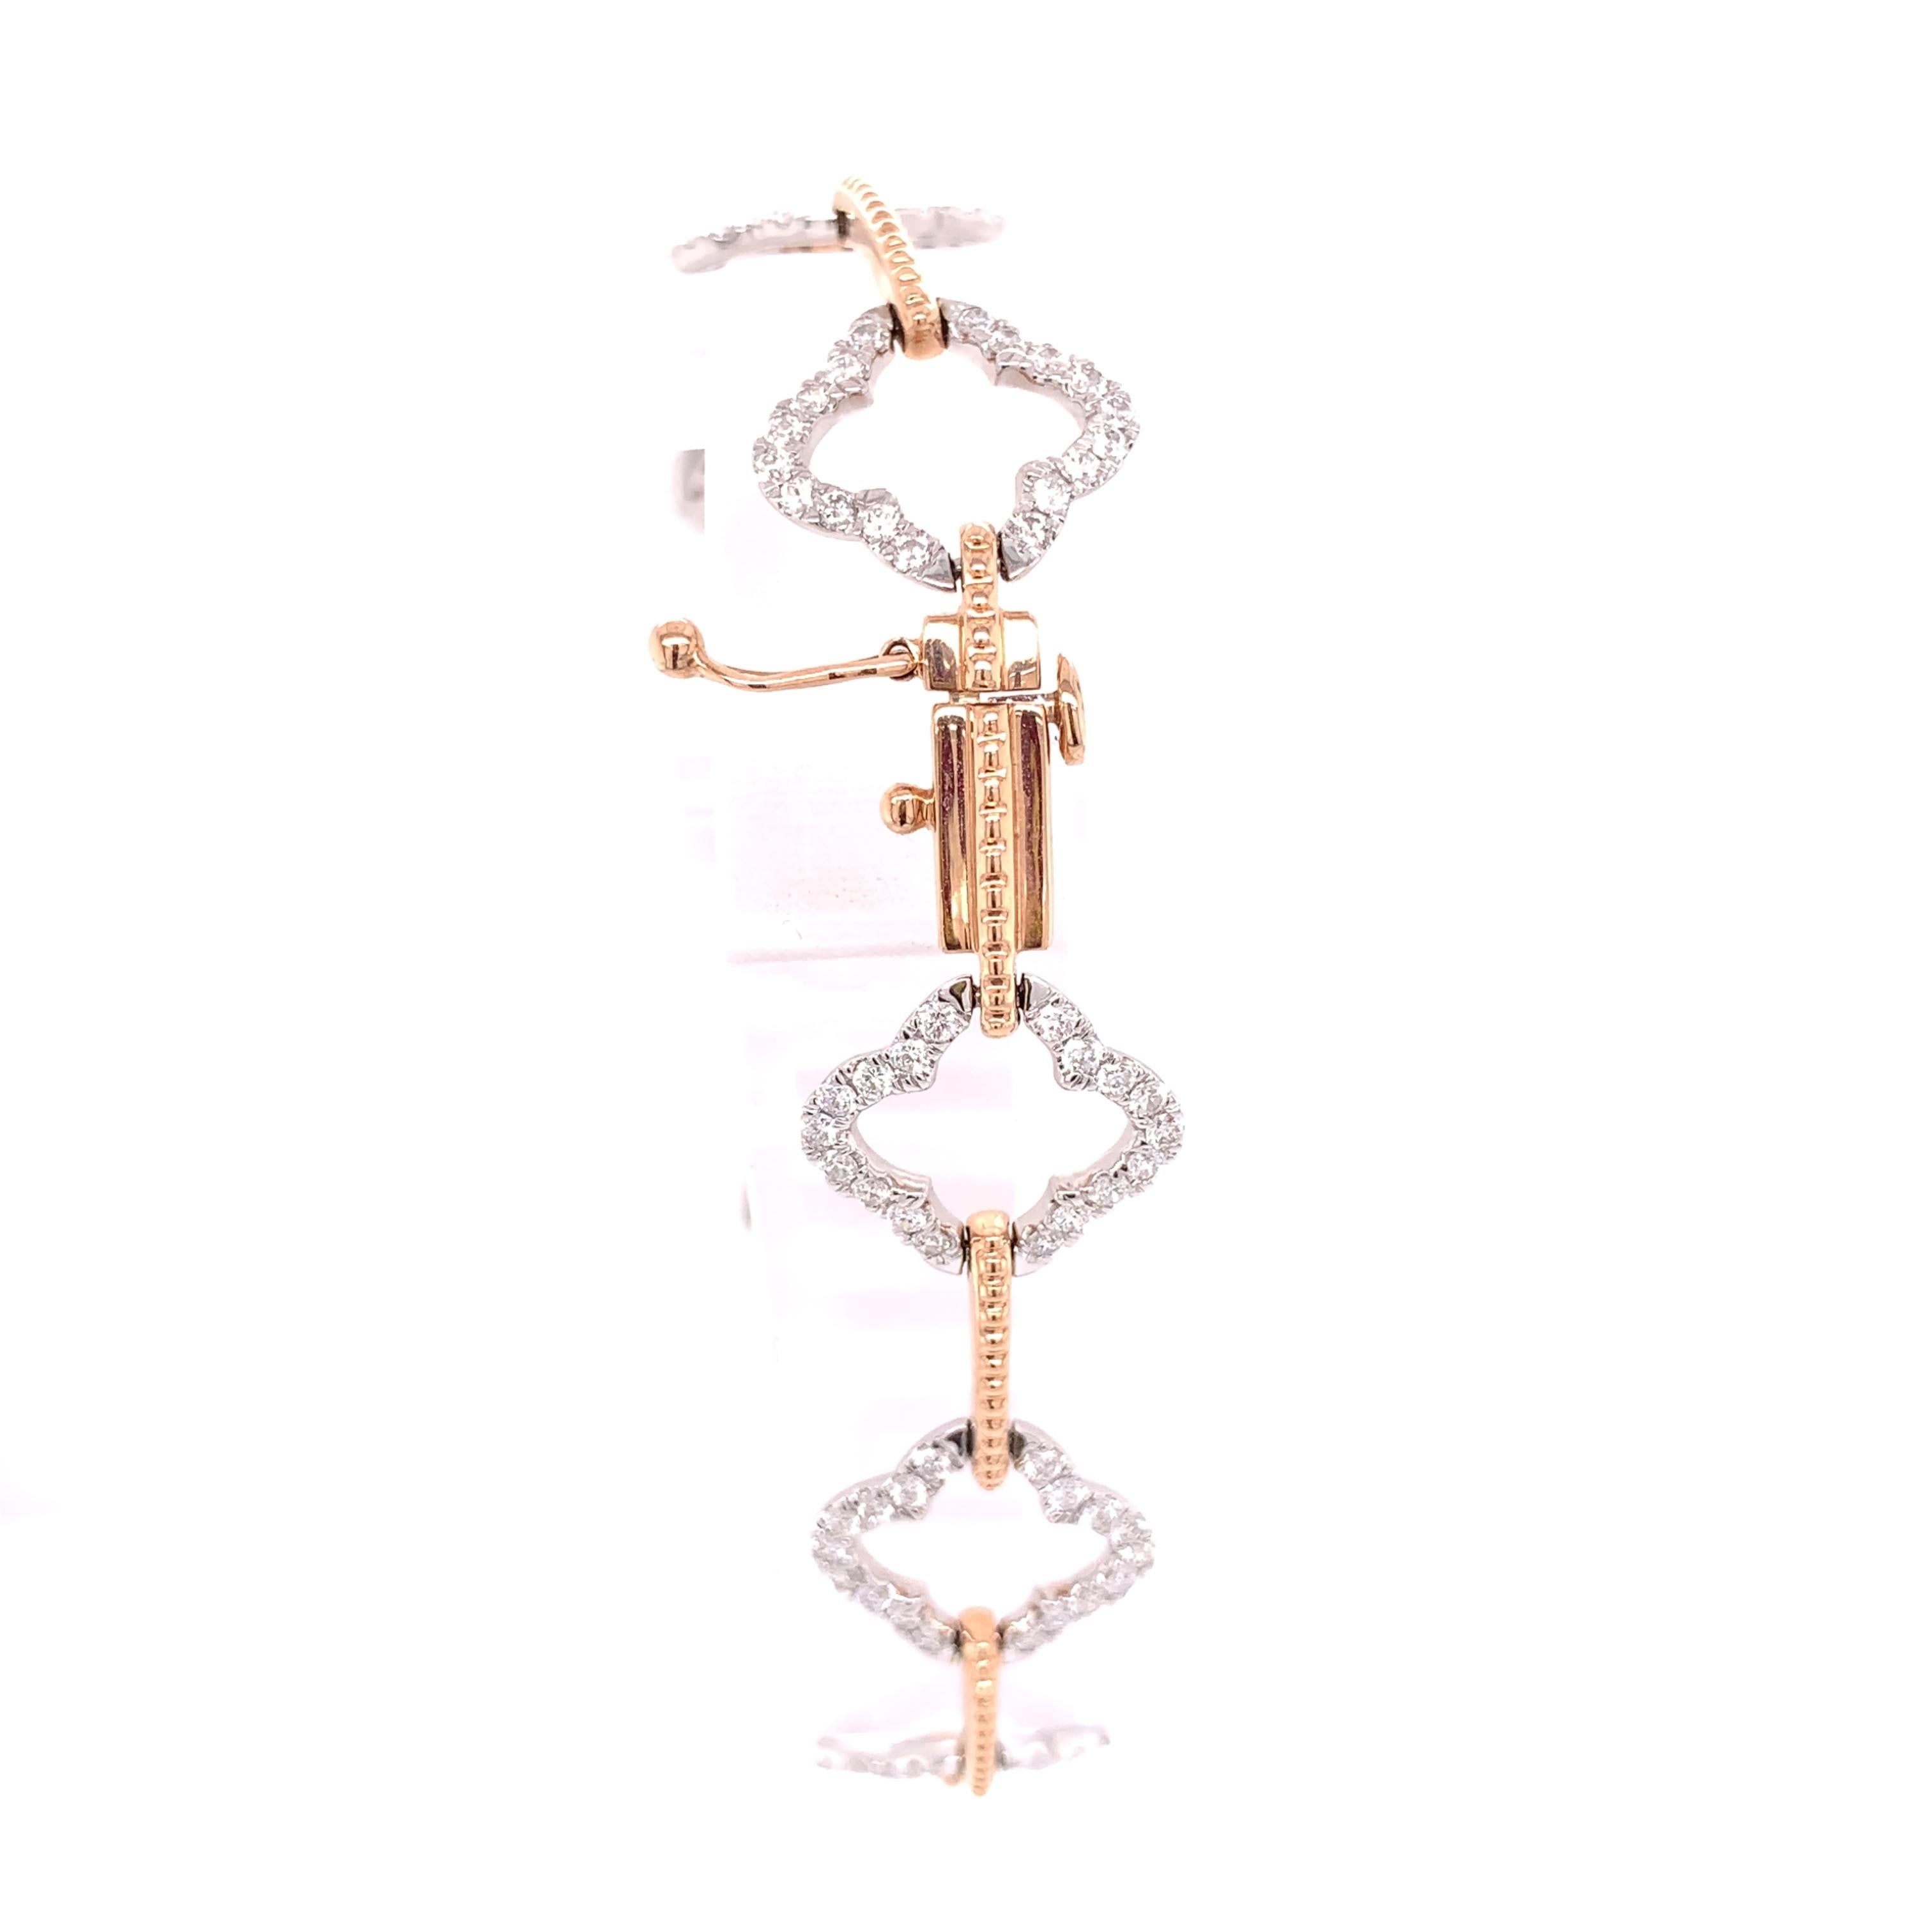 This bracelet is not your average tennis bracelet. This open clover style is incredibly unique! It was crafted in both 14 karat rose gold and white gold. The diamond weight is approximately 2 carats. This bracelet also comes with a safety clasp for